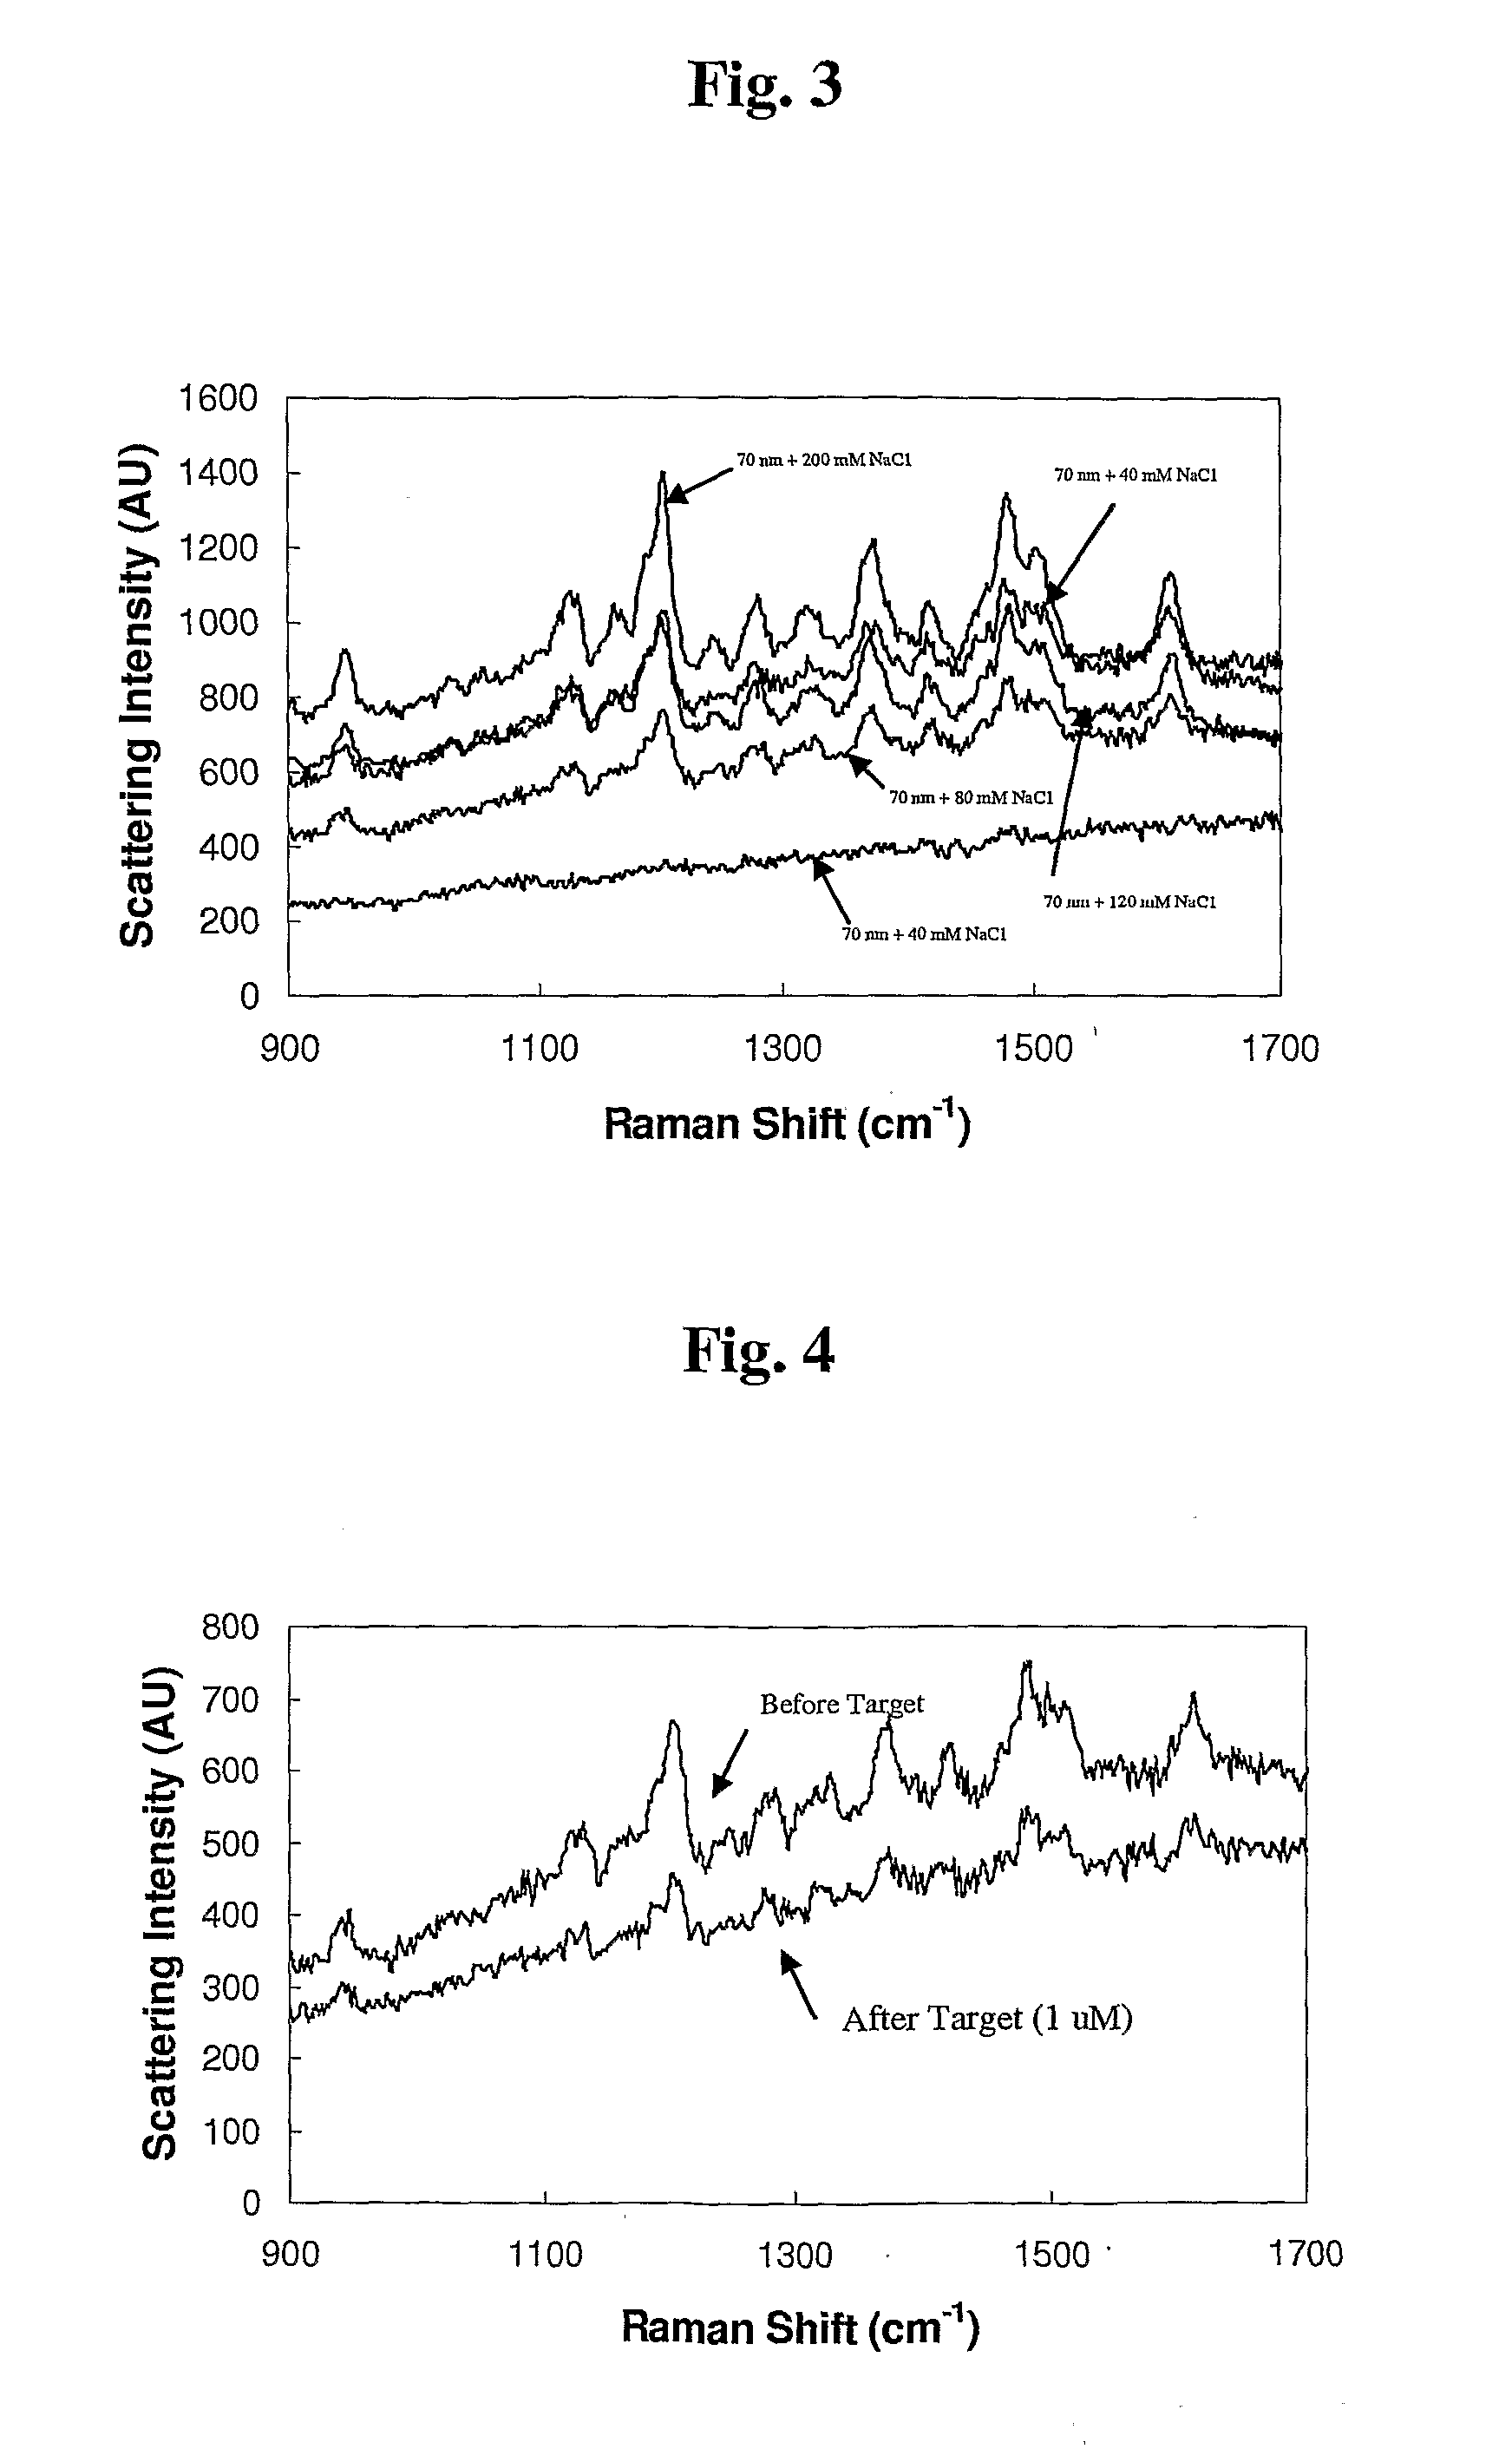 Sers-based methods for detection of bioagents